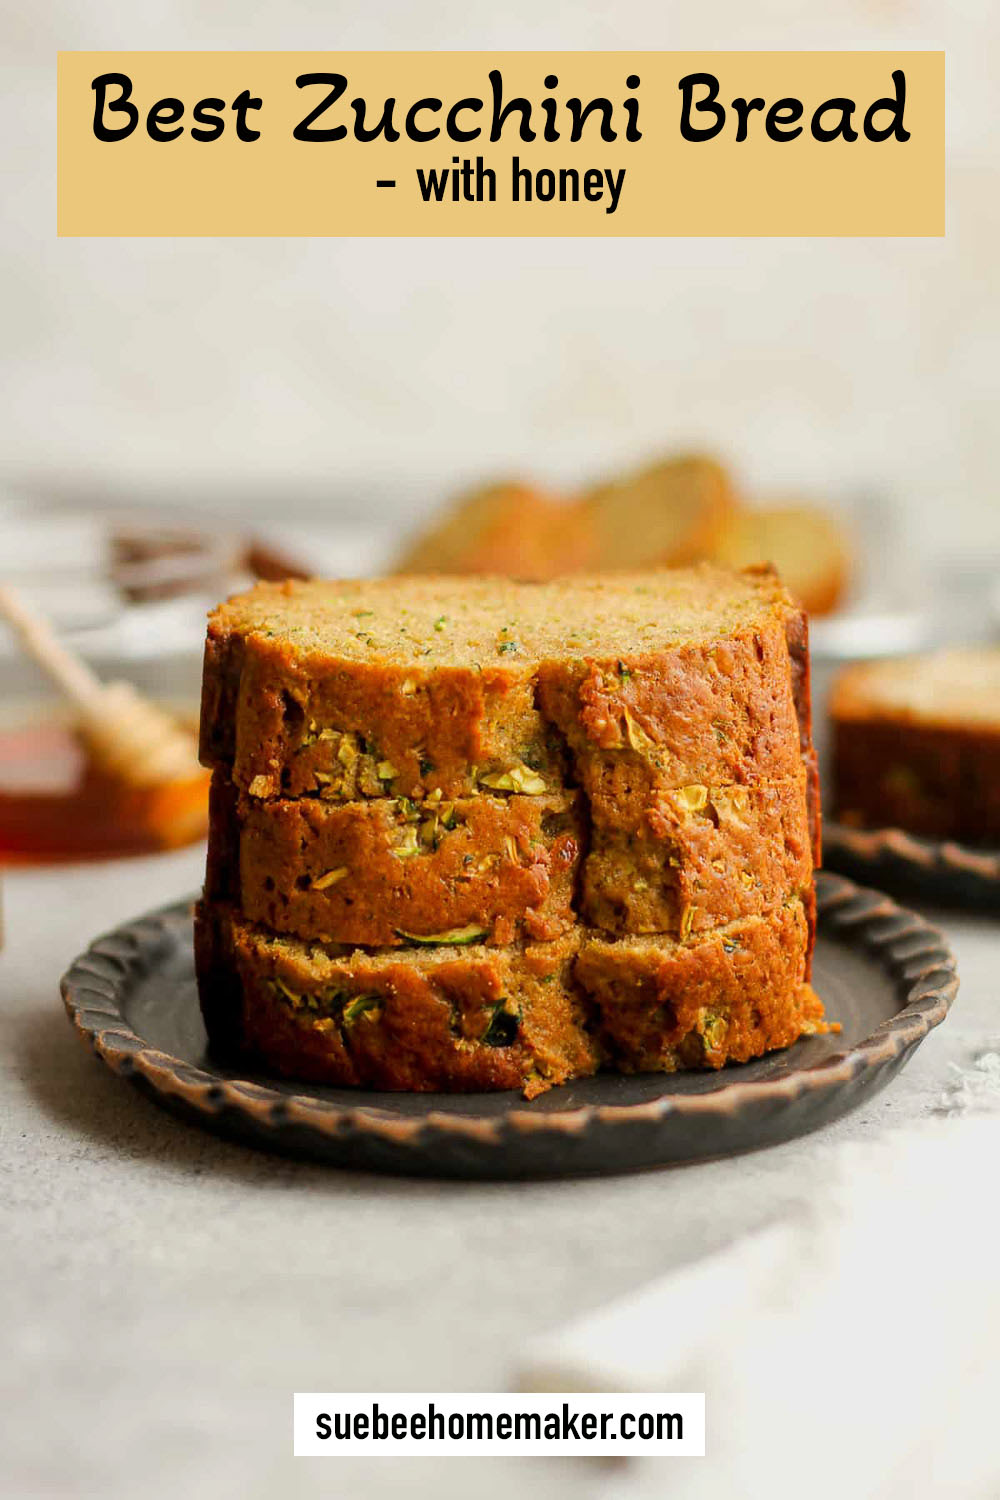 Three stacked slices of the best zucchini bread with honey.